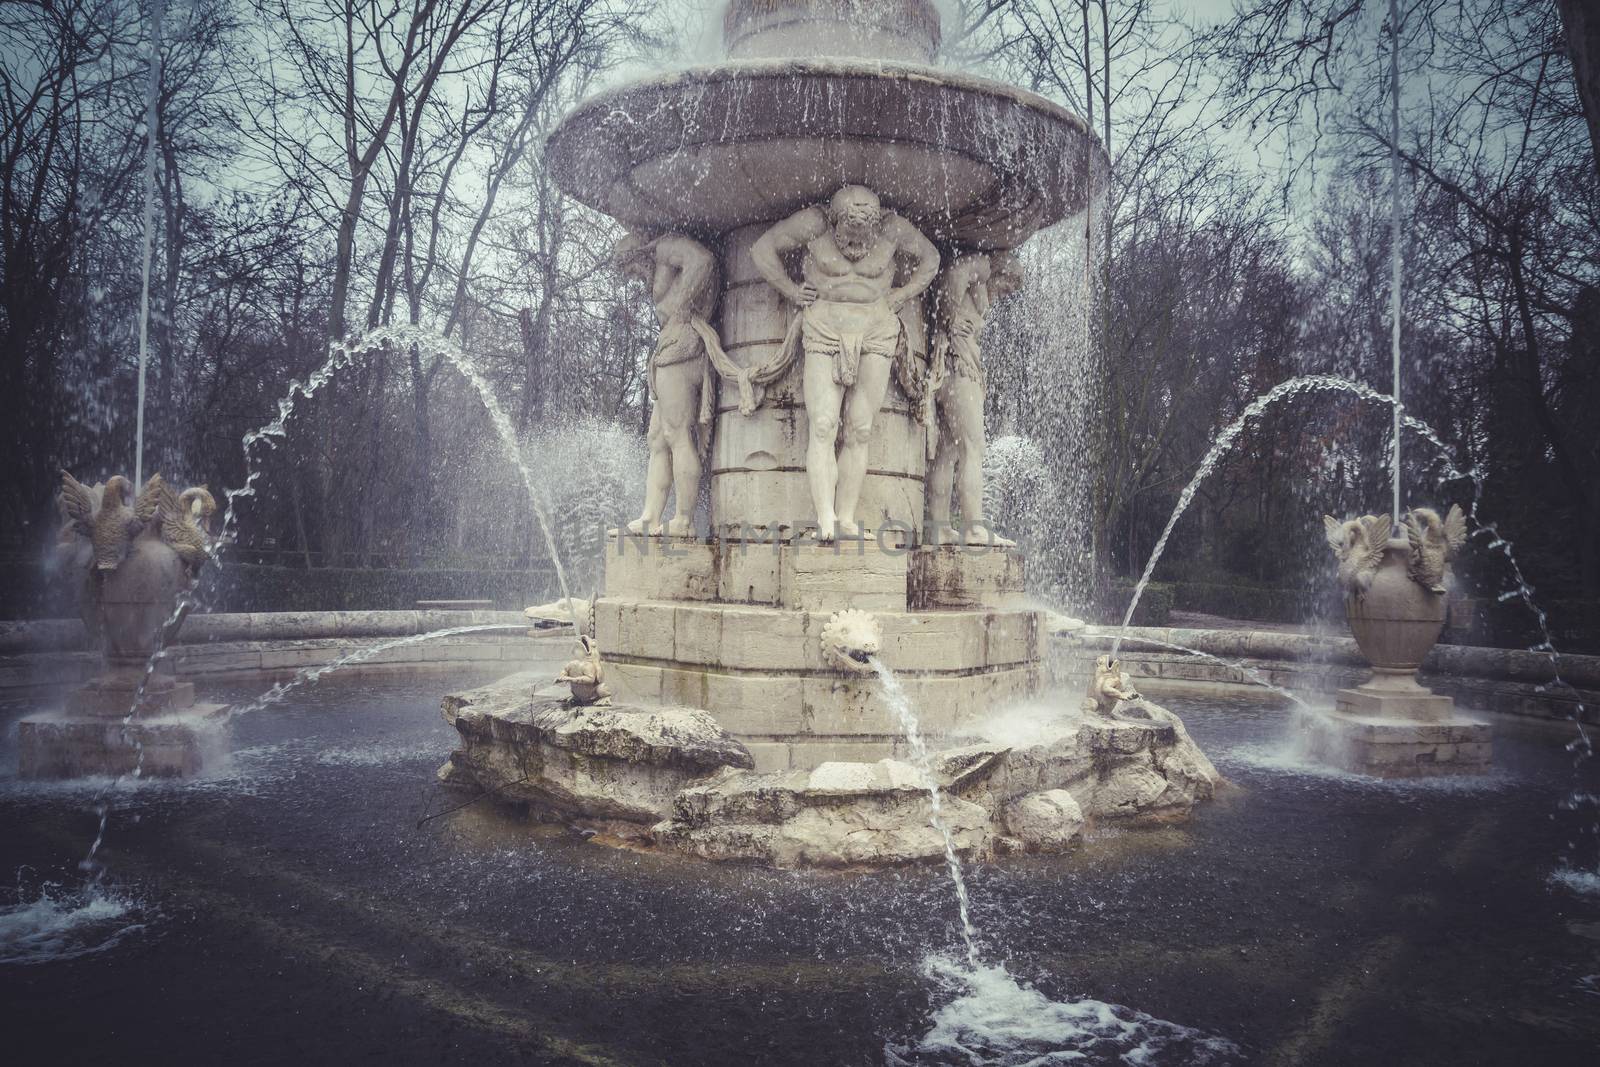 Hercules, Ornamental fountains of the Palace of Aranjuez, Madrid by FernandoCortes